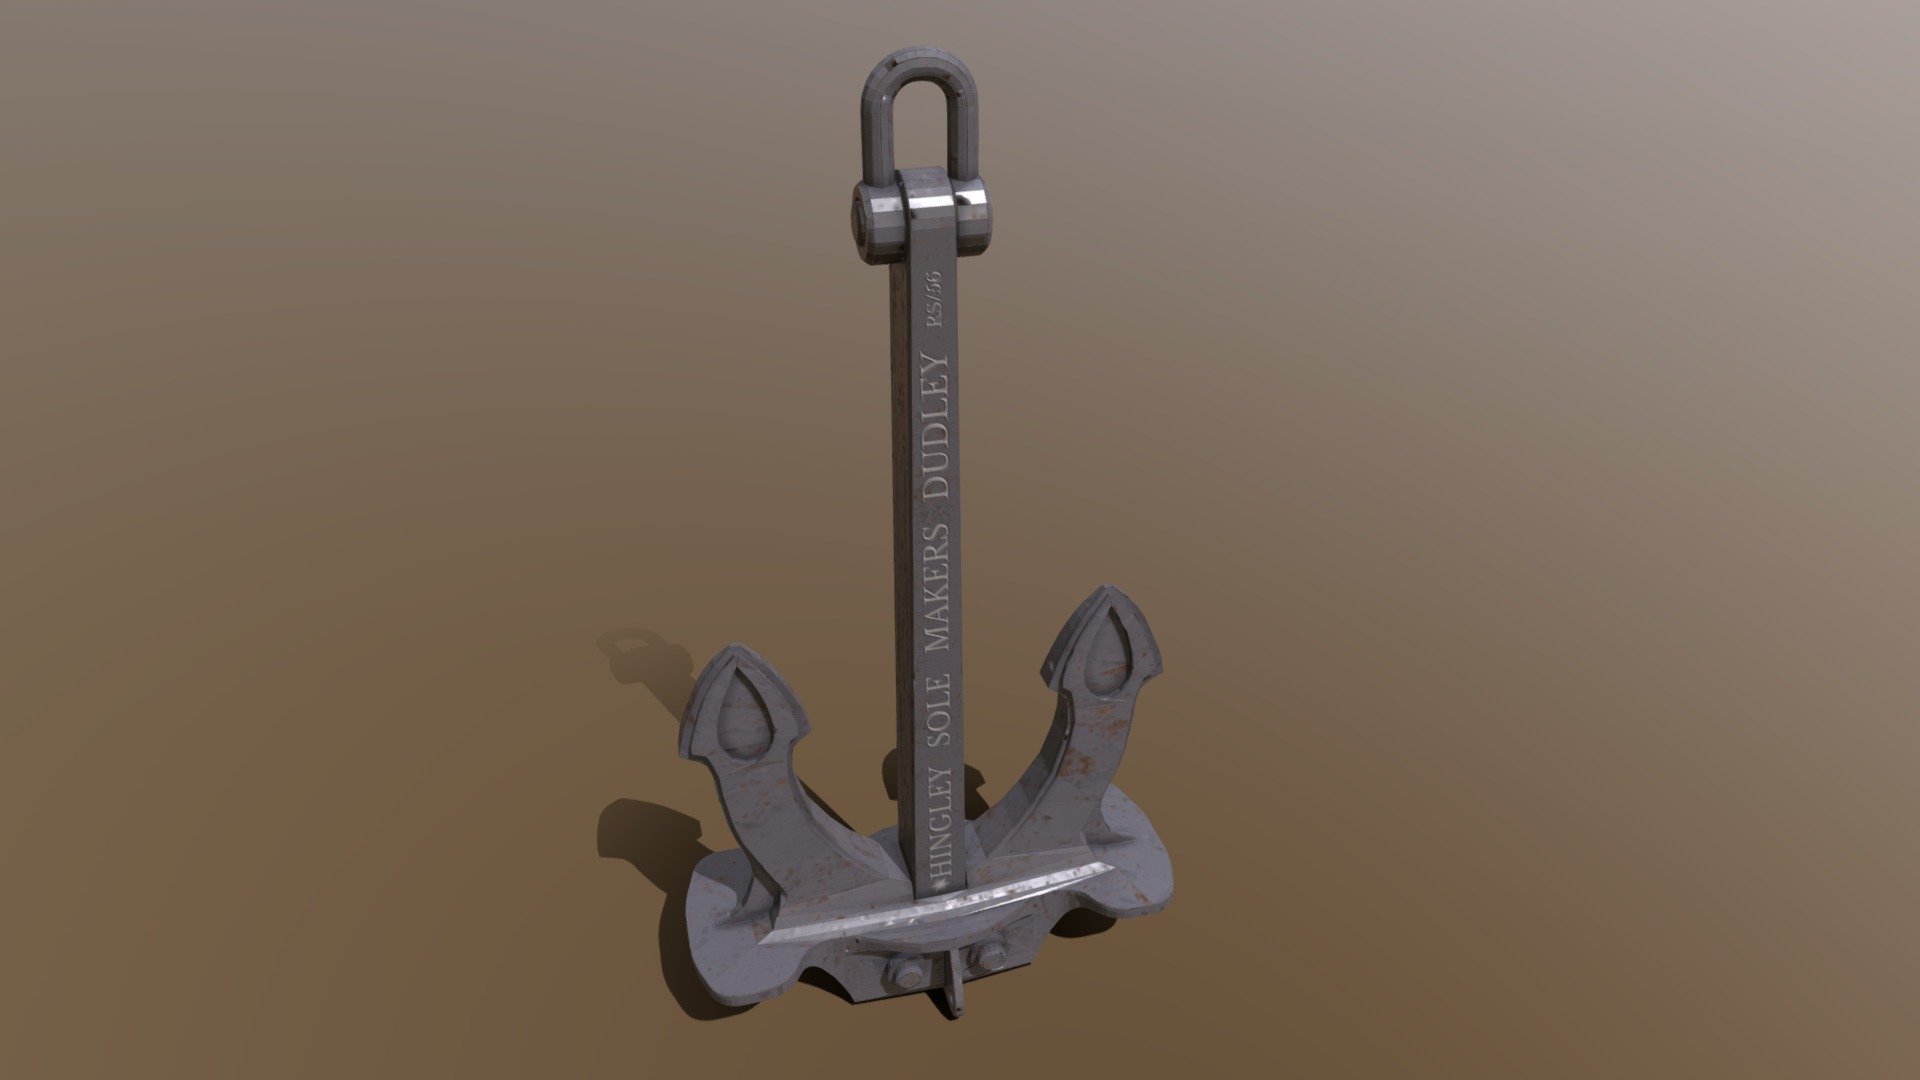 Autentic Titanic anchor detailed model
Blender 2.8 modeled
Substance painter textures
Unreal, unity engine ready
Blender 2.9 modeled
Substance painter original textures 2k res. 
Realstic scale asset and game ready.
Download includes:
2k &amp; 4k PBR textures
.blend file
.fbx - Titanic anchor - Buy Royalty Free 3D model by Thomas Binder (@bindertom61) 3d model